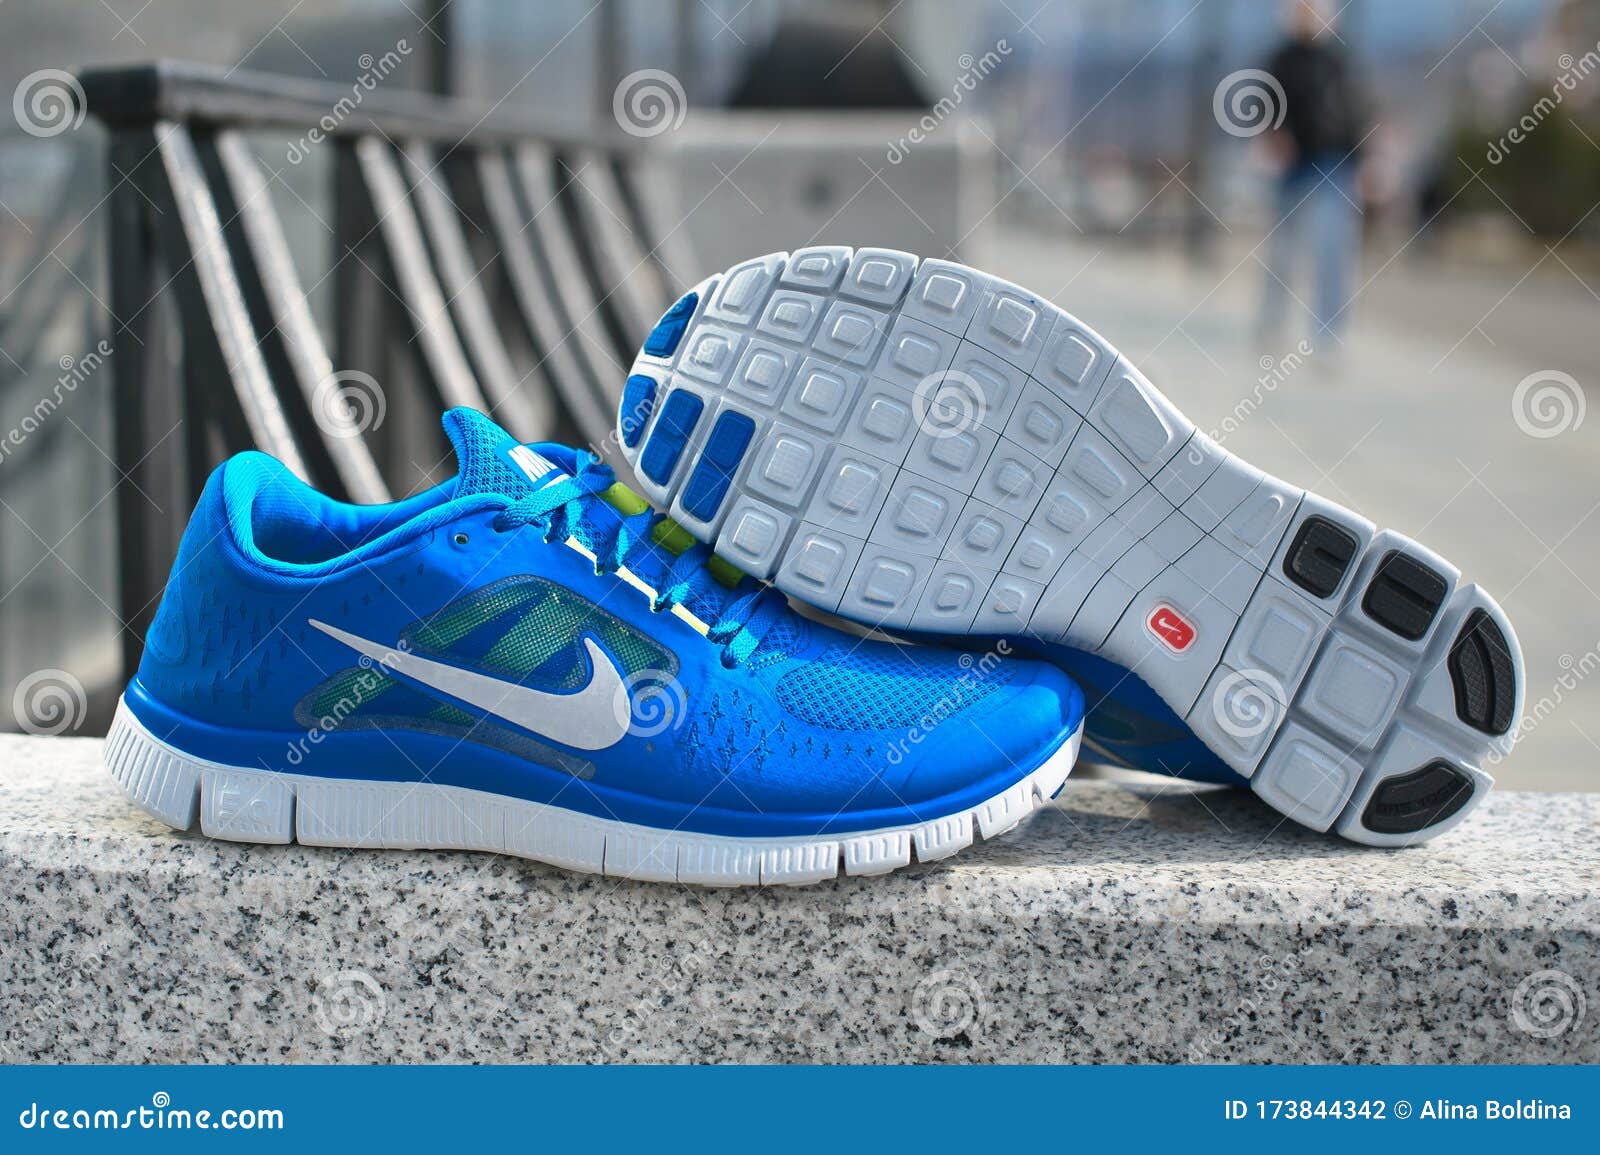 nikes shoes 2015